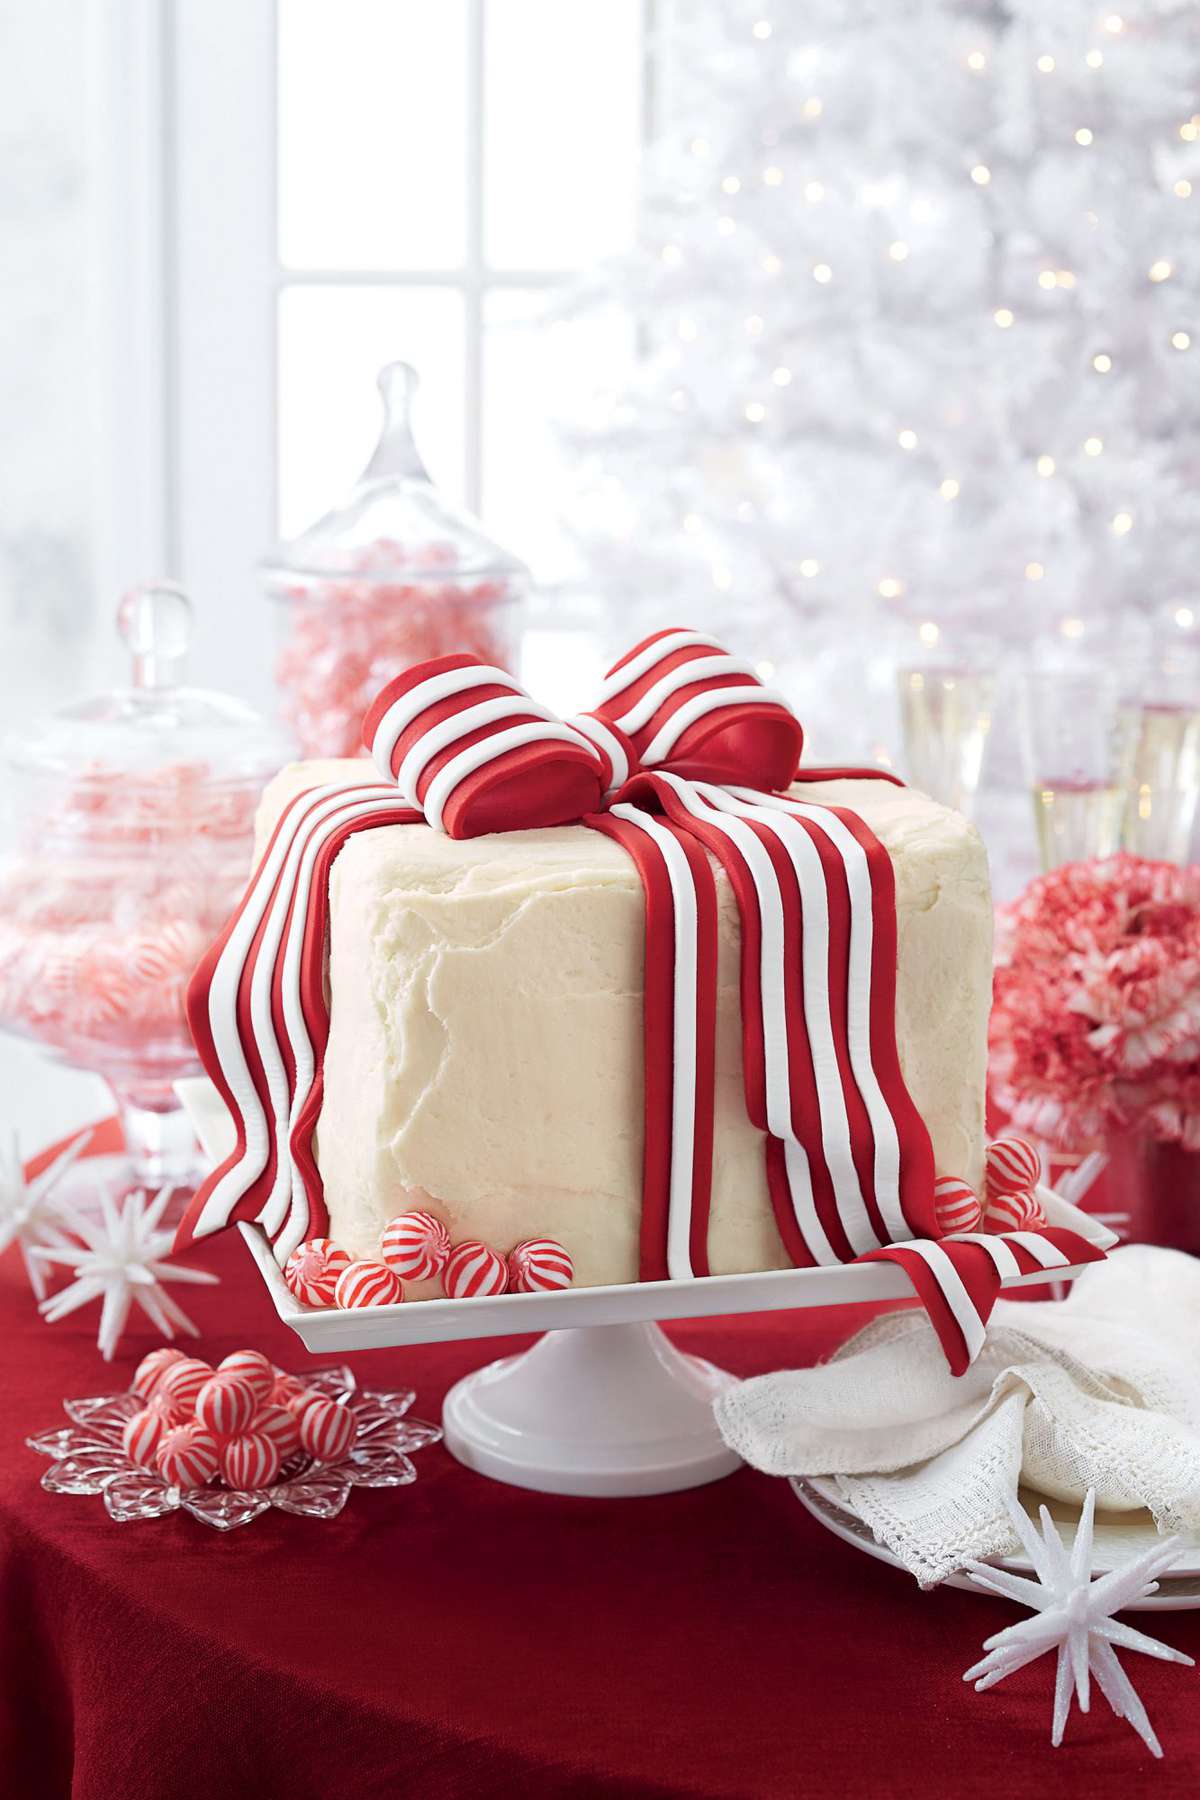 60 Showstopping Christmas Cake Recipes Southern Living